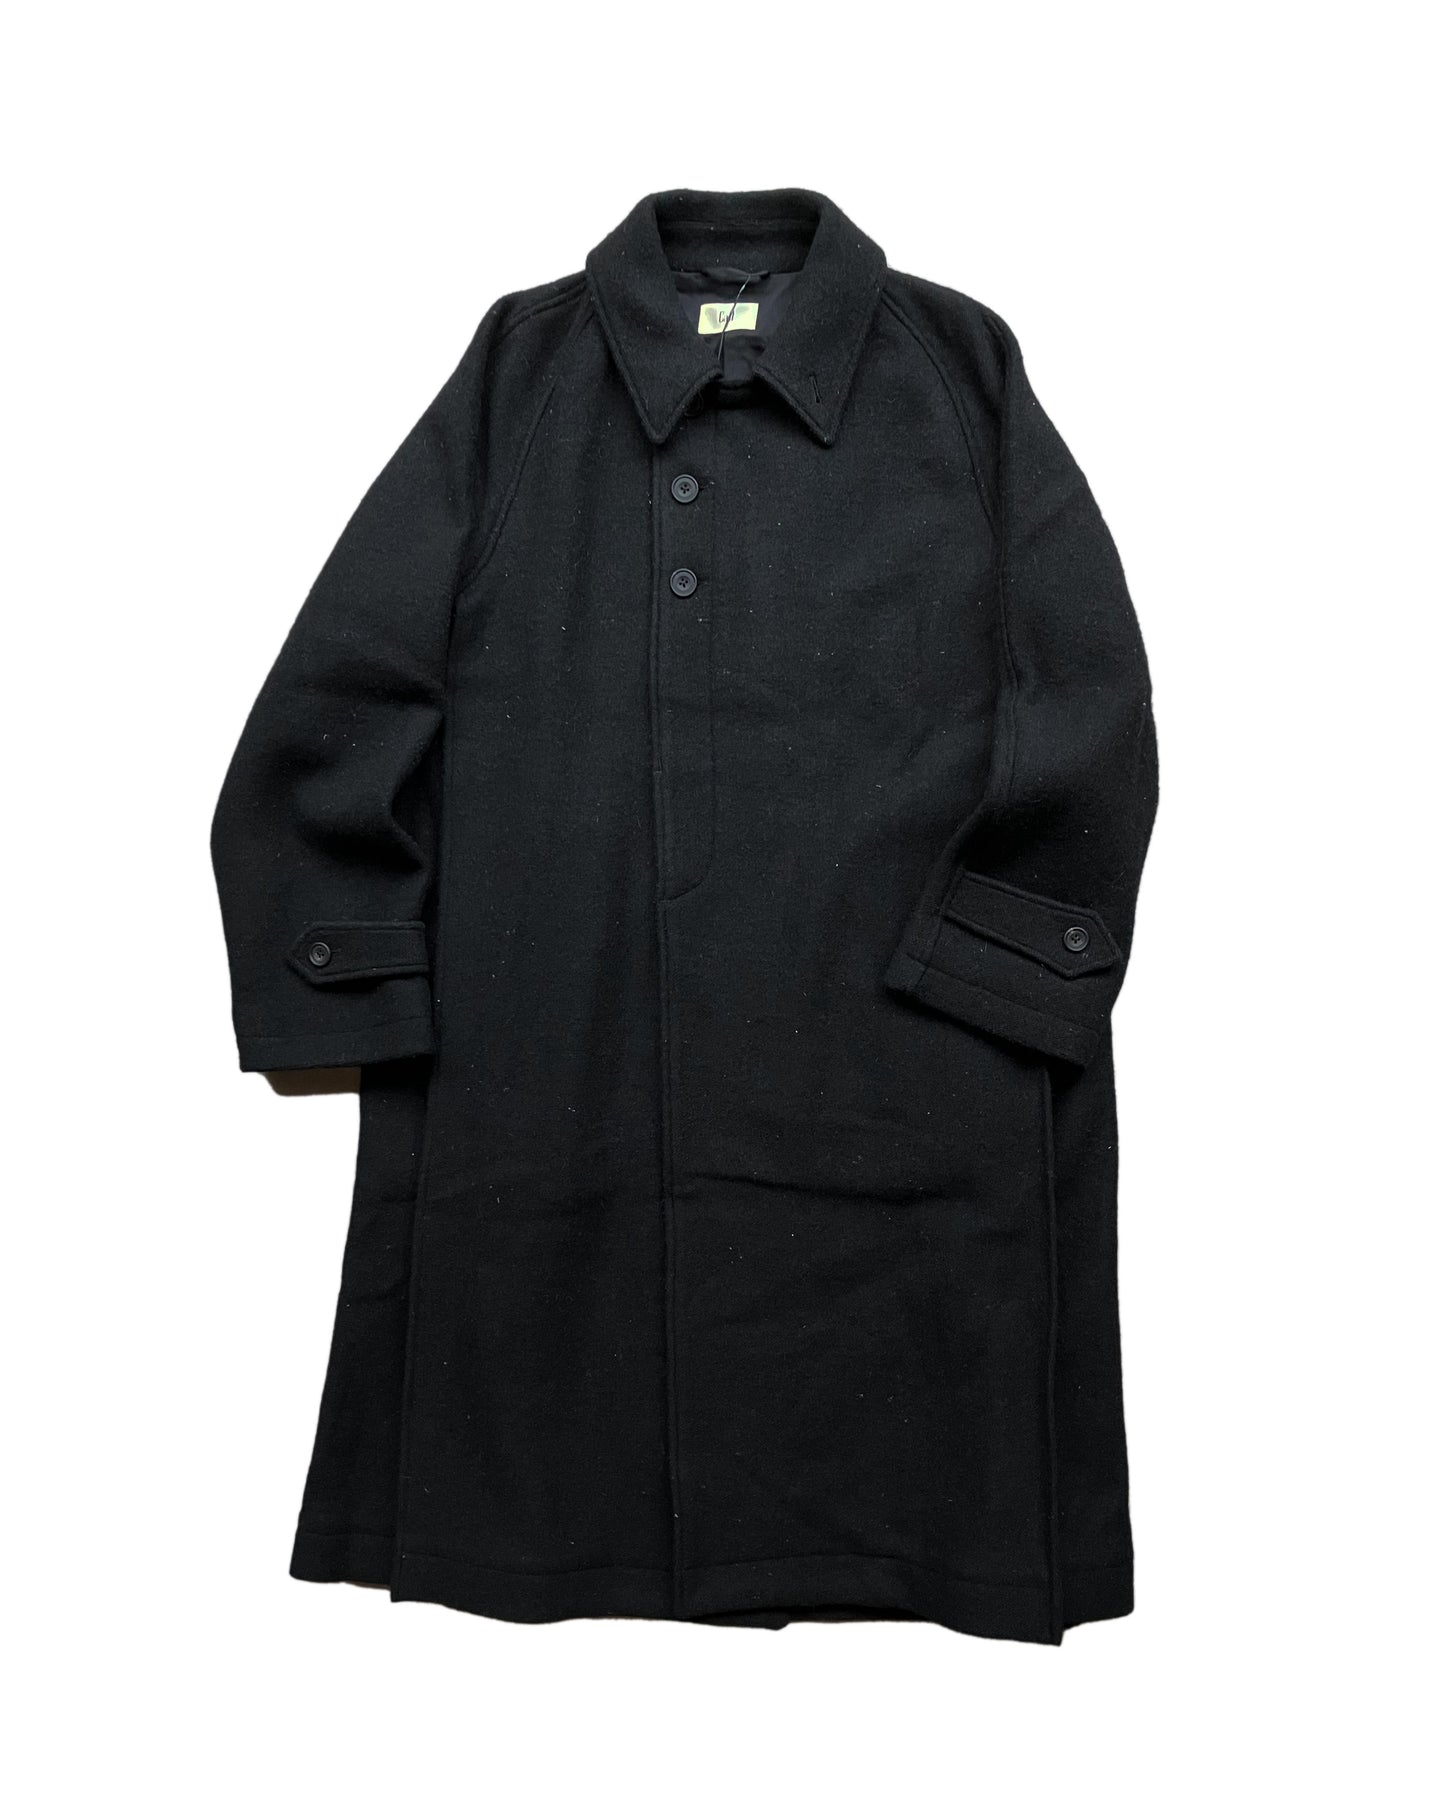 Call - CL_AW23_CO_01 / SIDE PLEATS OVER COAT - Black knit